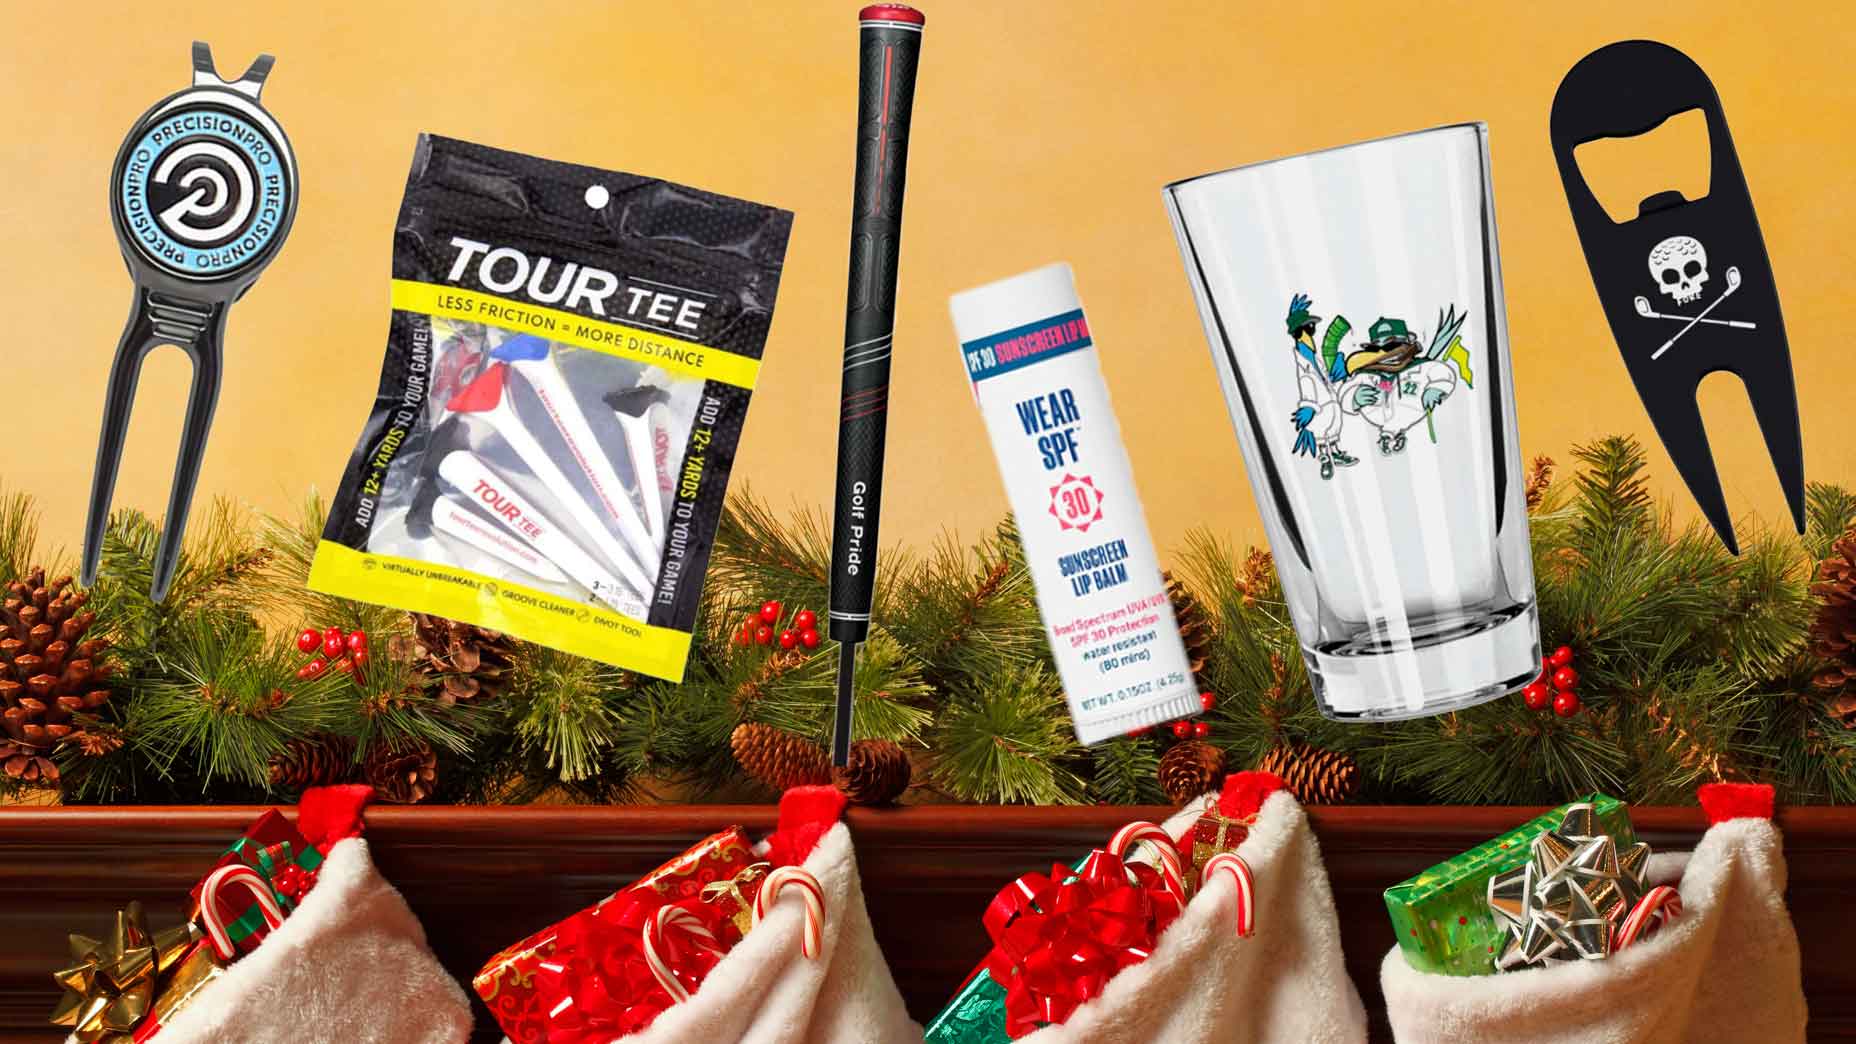 Golf accessories with stockings in the background